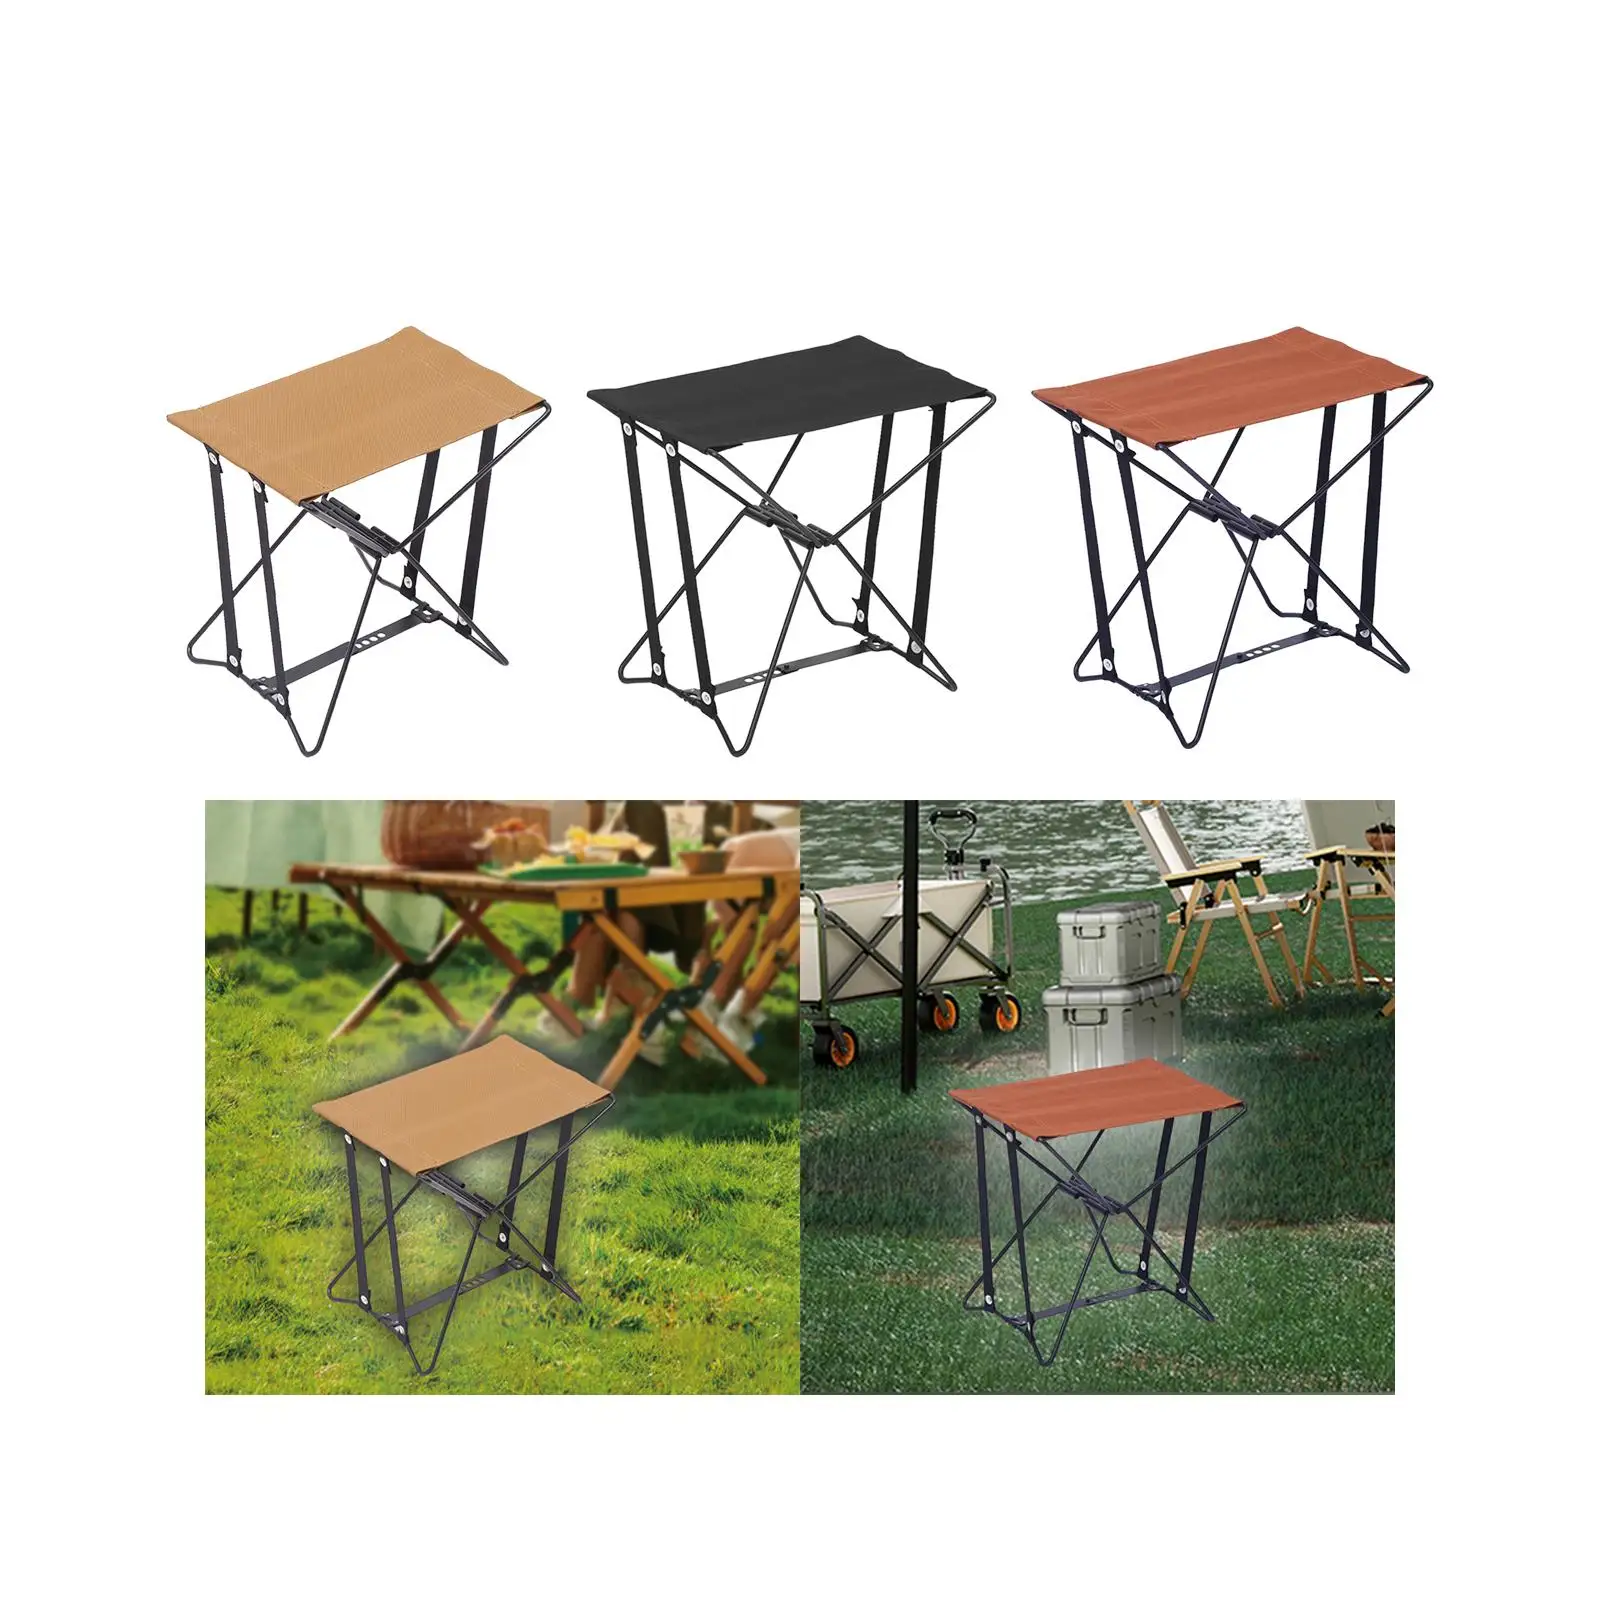 Portable Folding Stool Small Footrest Foot Rest Footstool Camping Stool Fishing Chair for Patio Backpacking Garden BBQ Barbecue